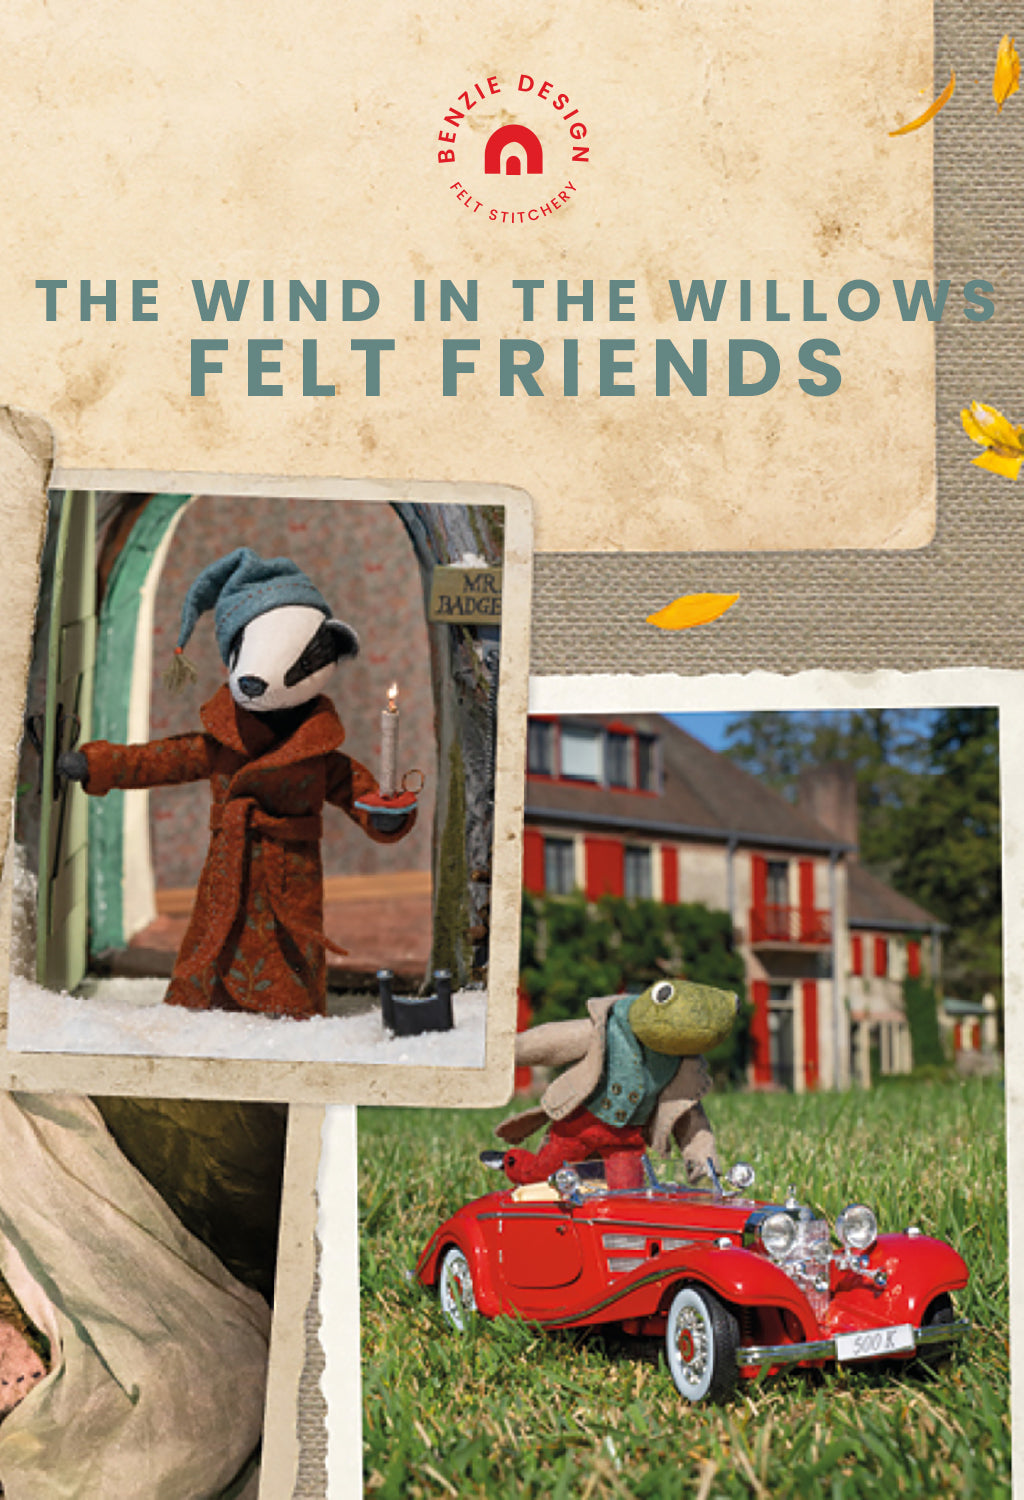 The Wind in the Willows Felt Friends book review